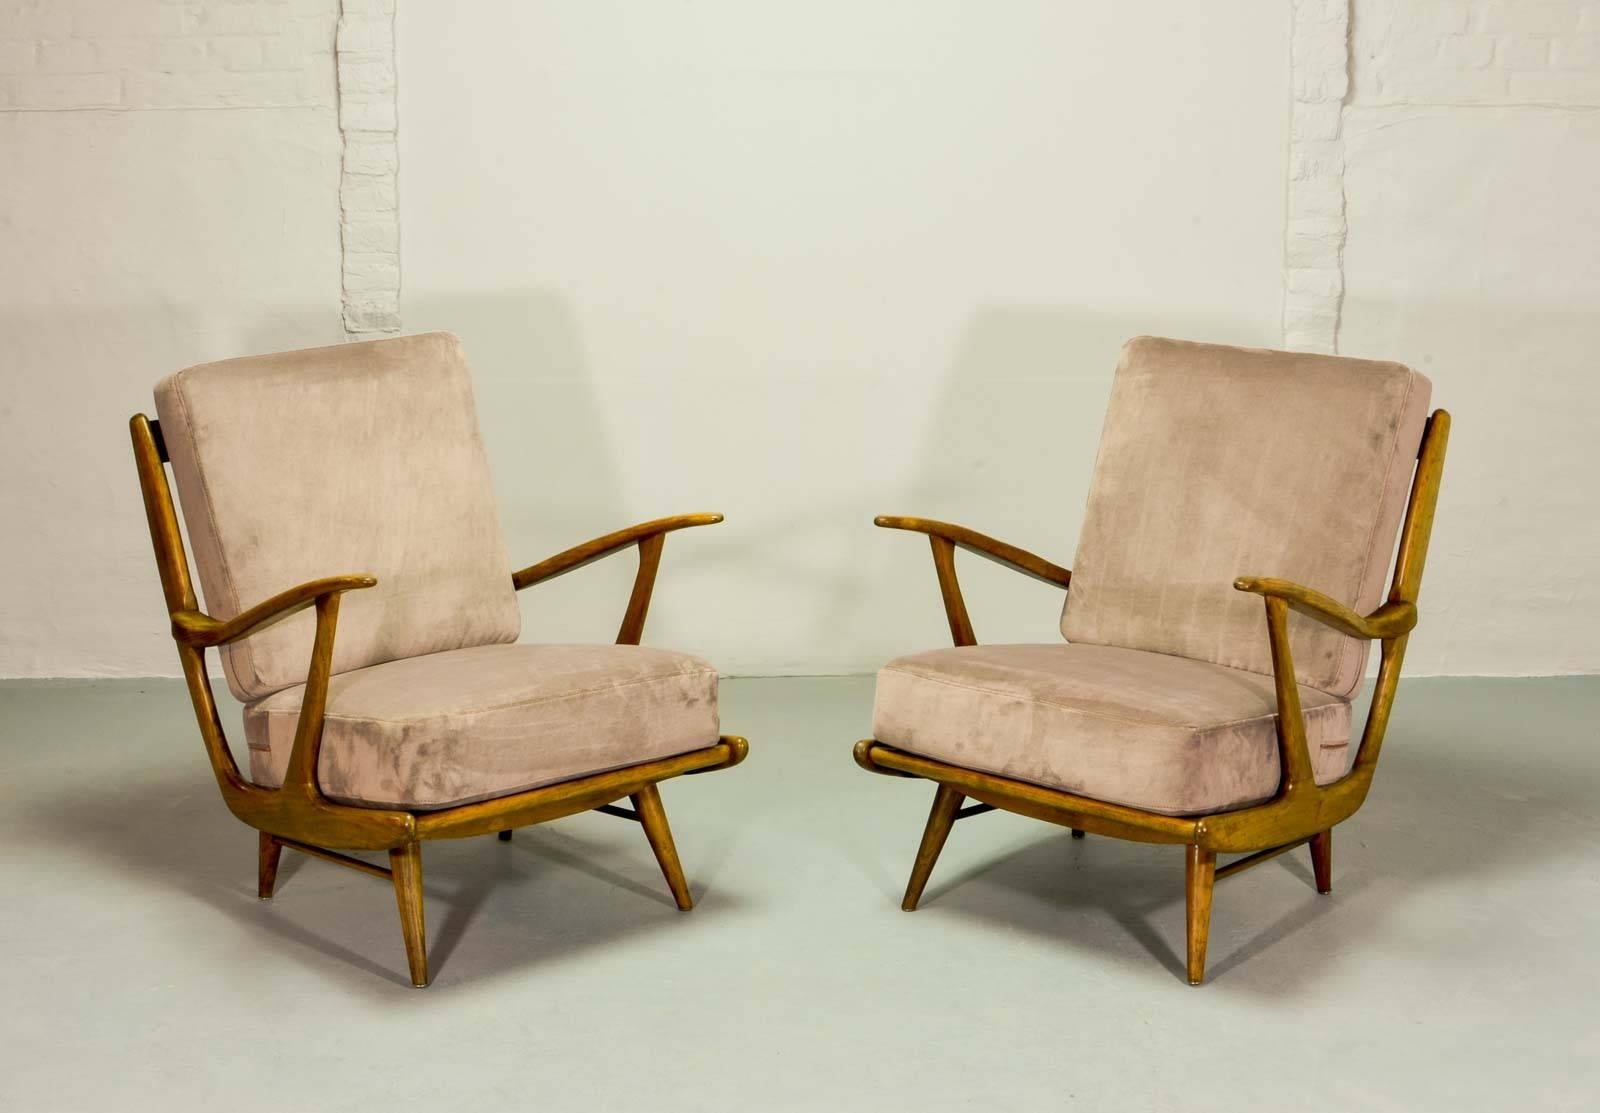 Dutch Mid-Century Art-Deco Influenced Spindle Back Lounge Chairs, 1950s